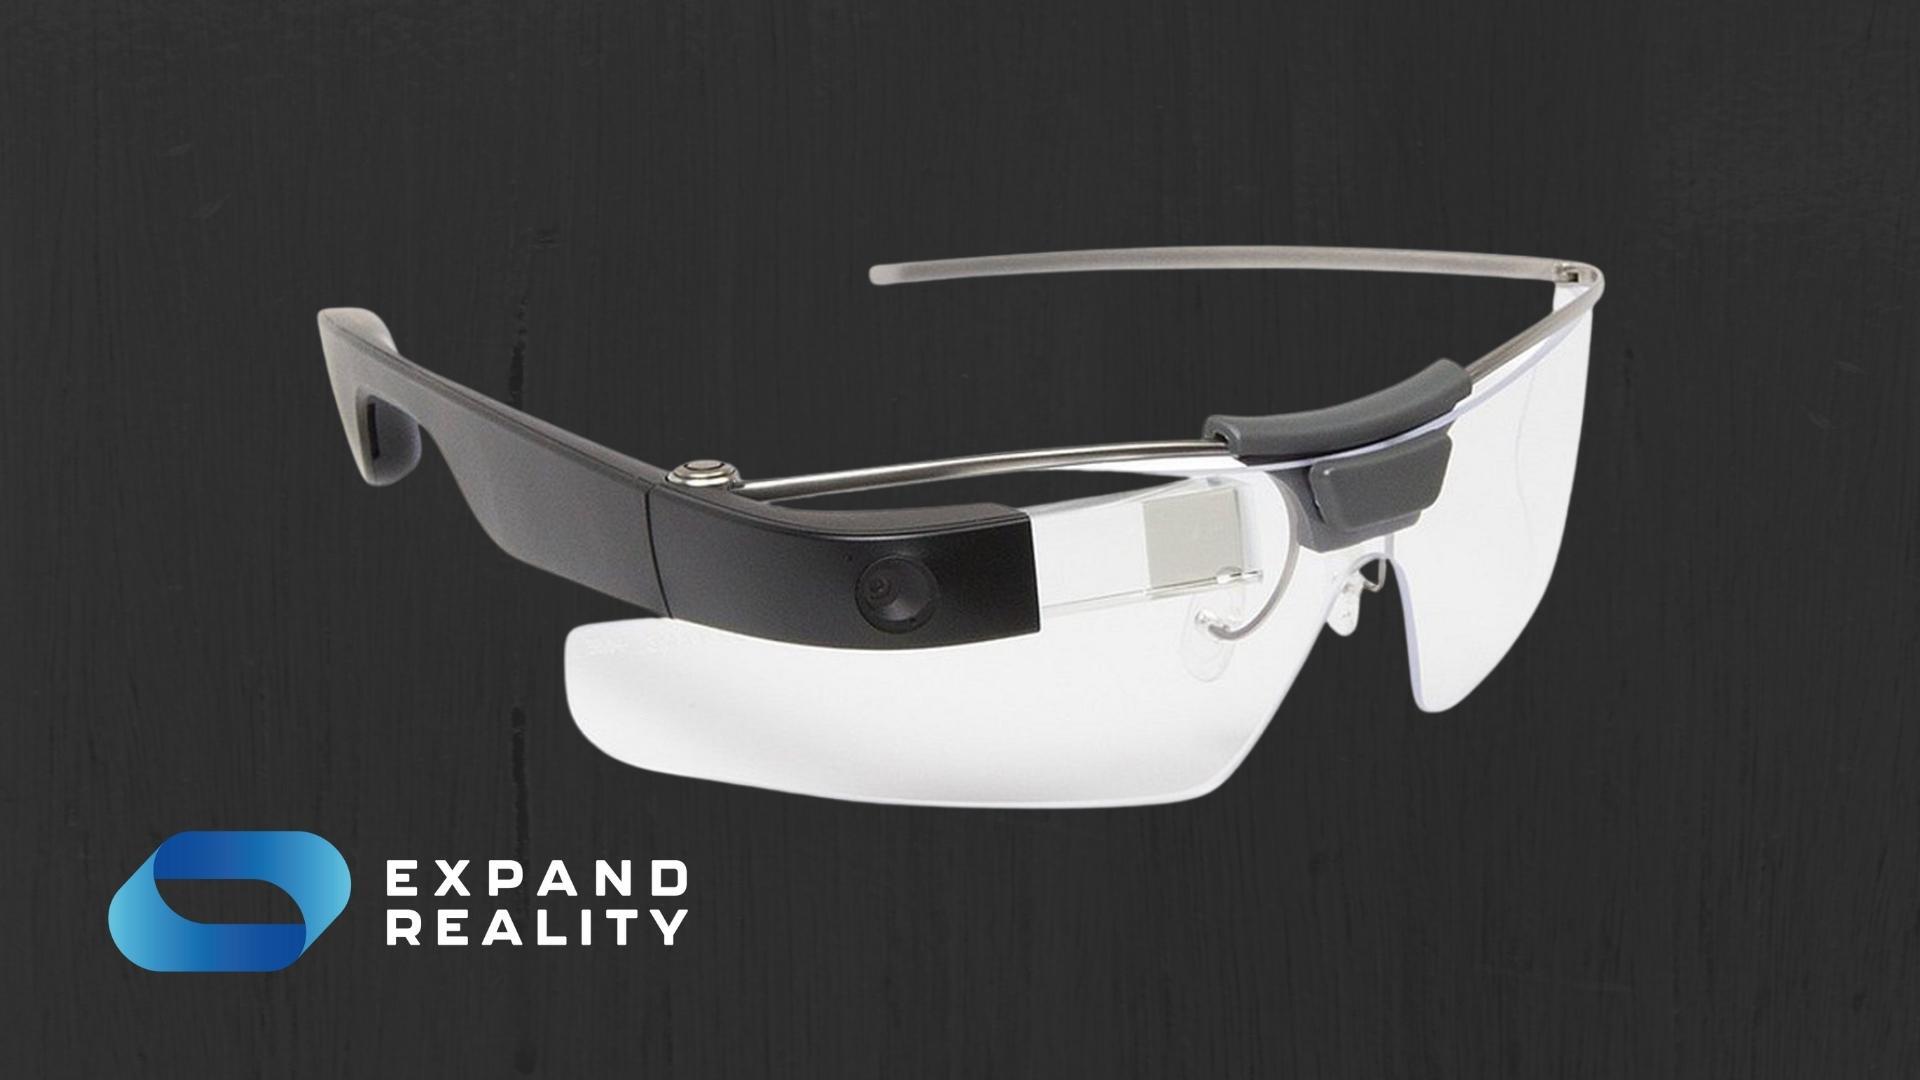 Rumours of Google Glass's death have been greatly exaggerated. In fact, the pioneering XR device lives on as a useful enterprise tool. Learn more inside.